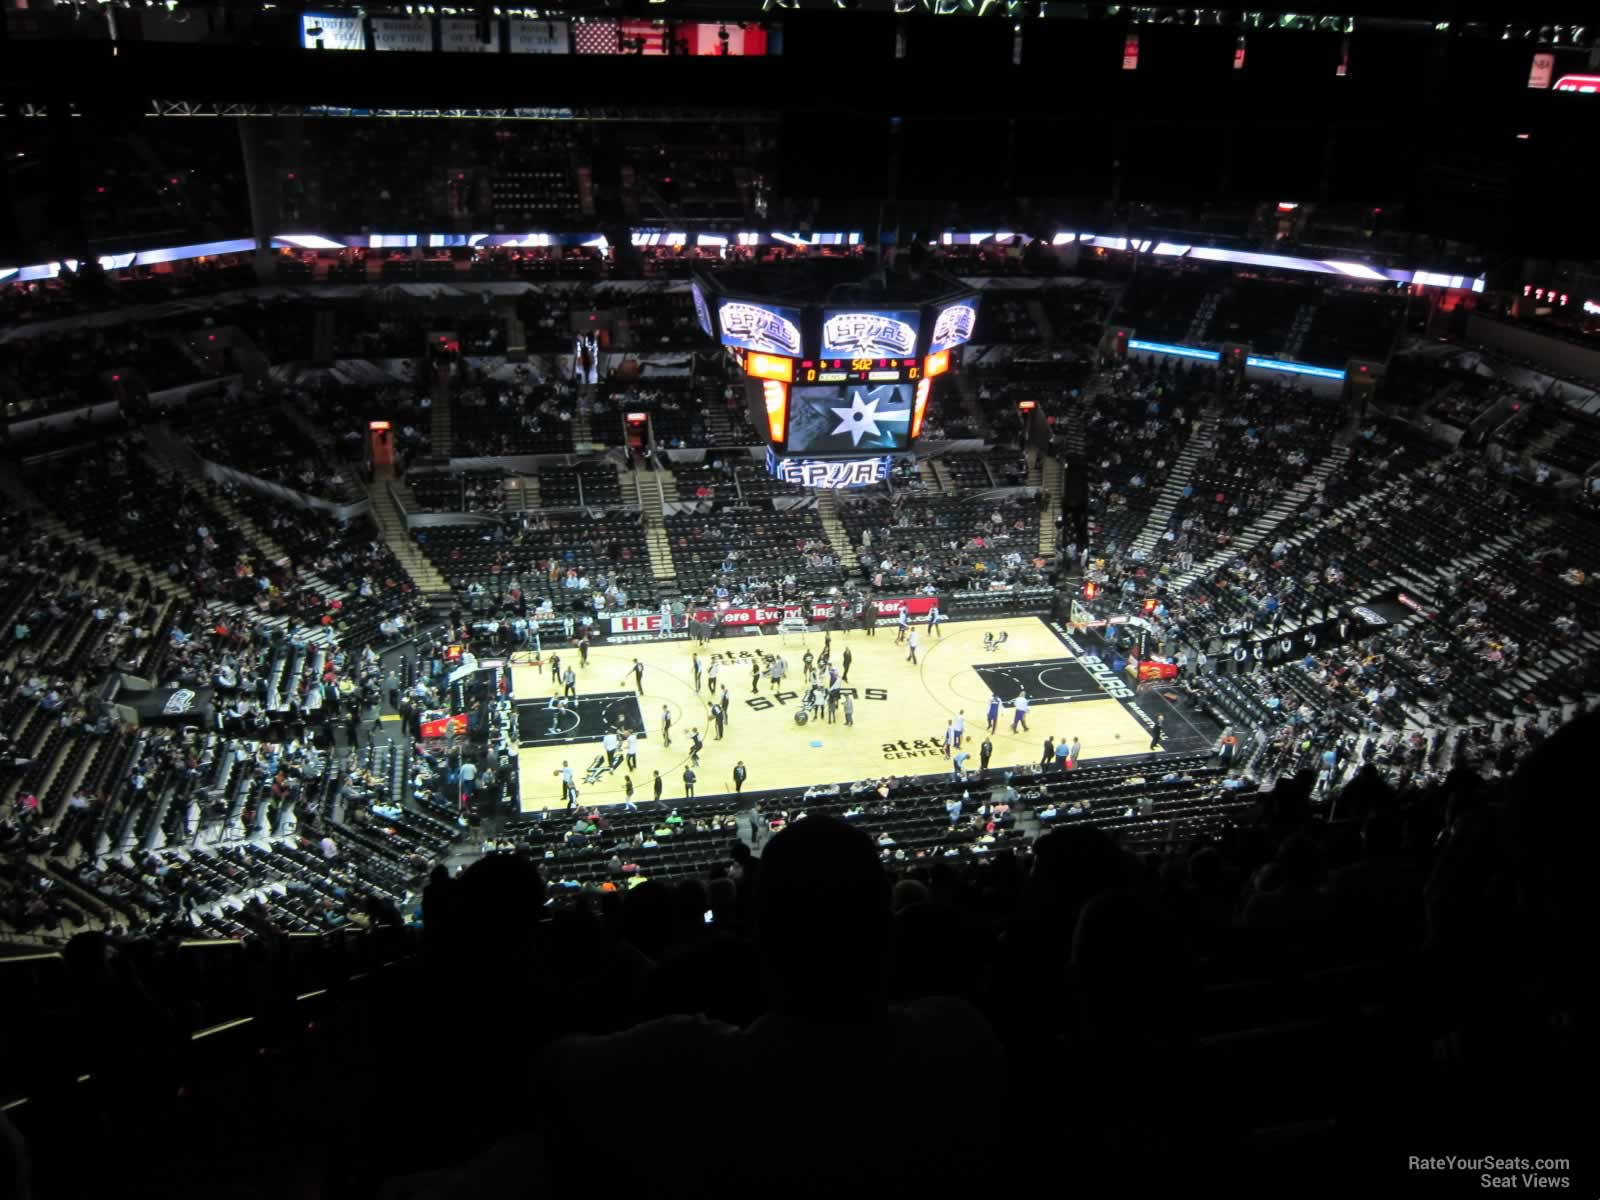 section 225, row 21 seat view  for basketball - at&t center